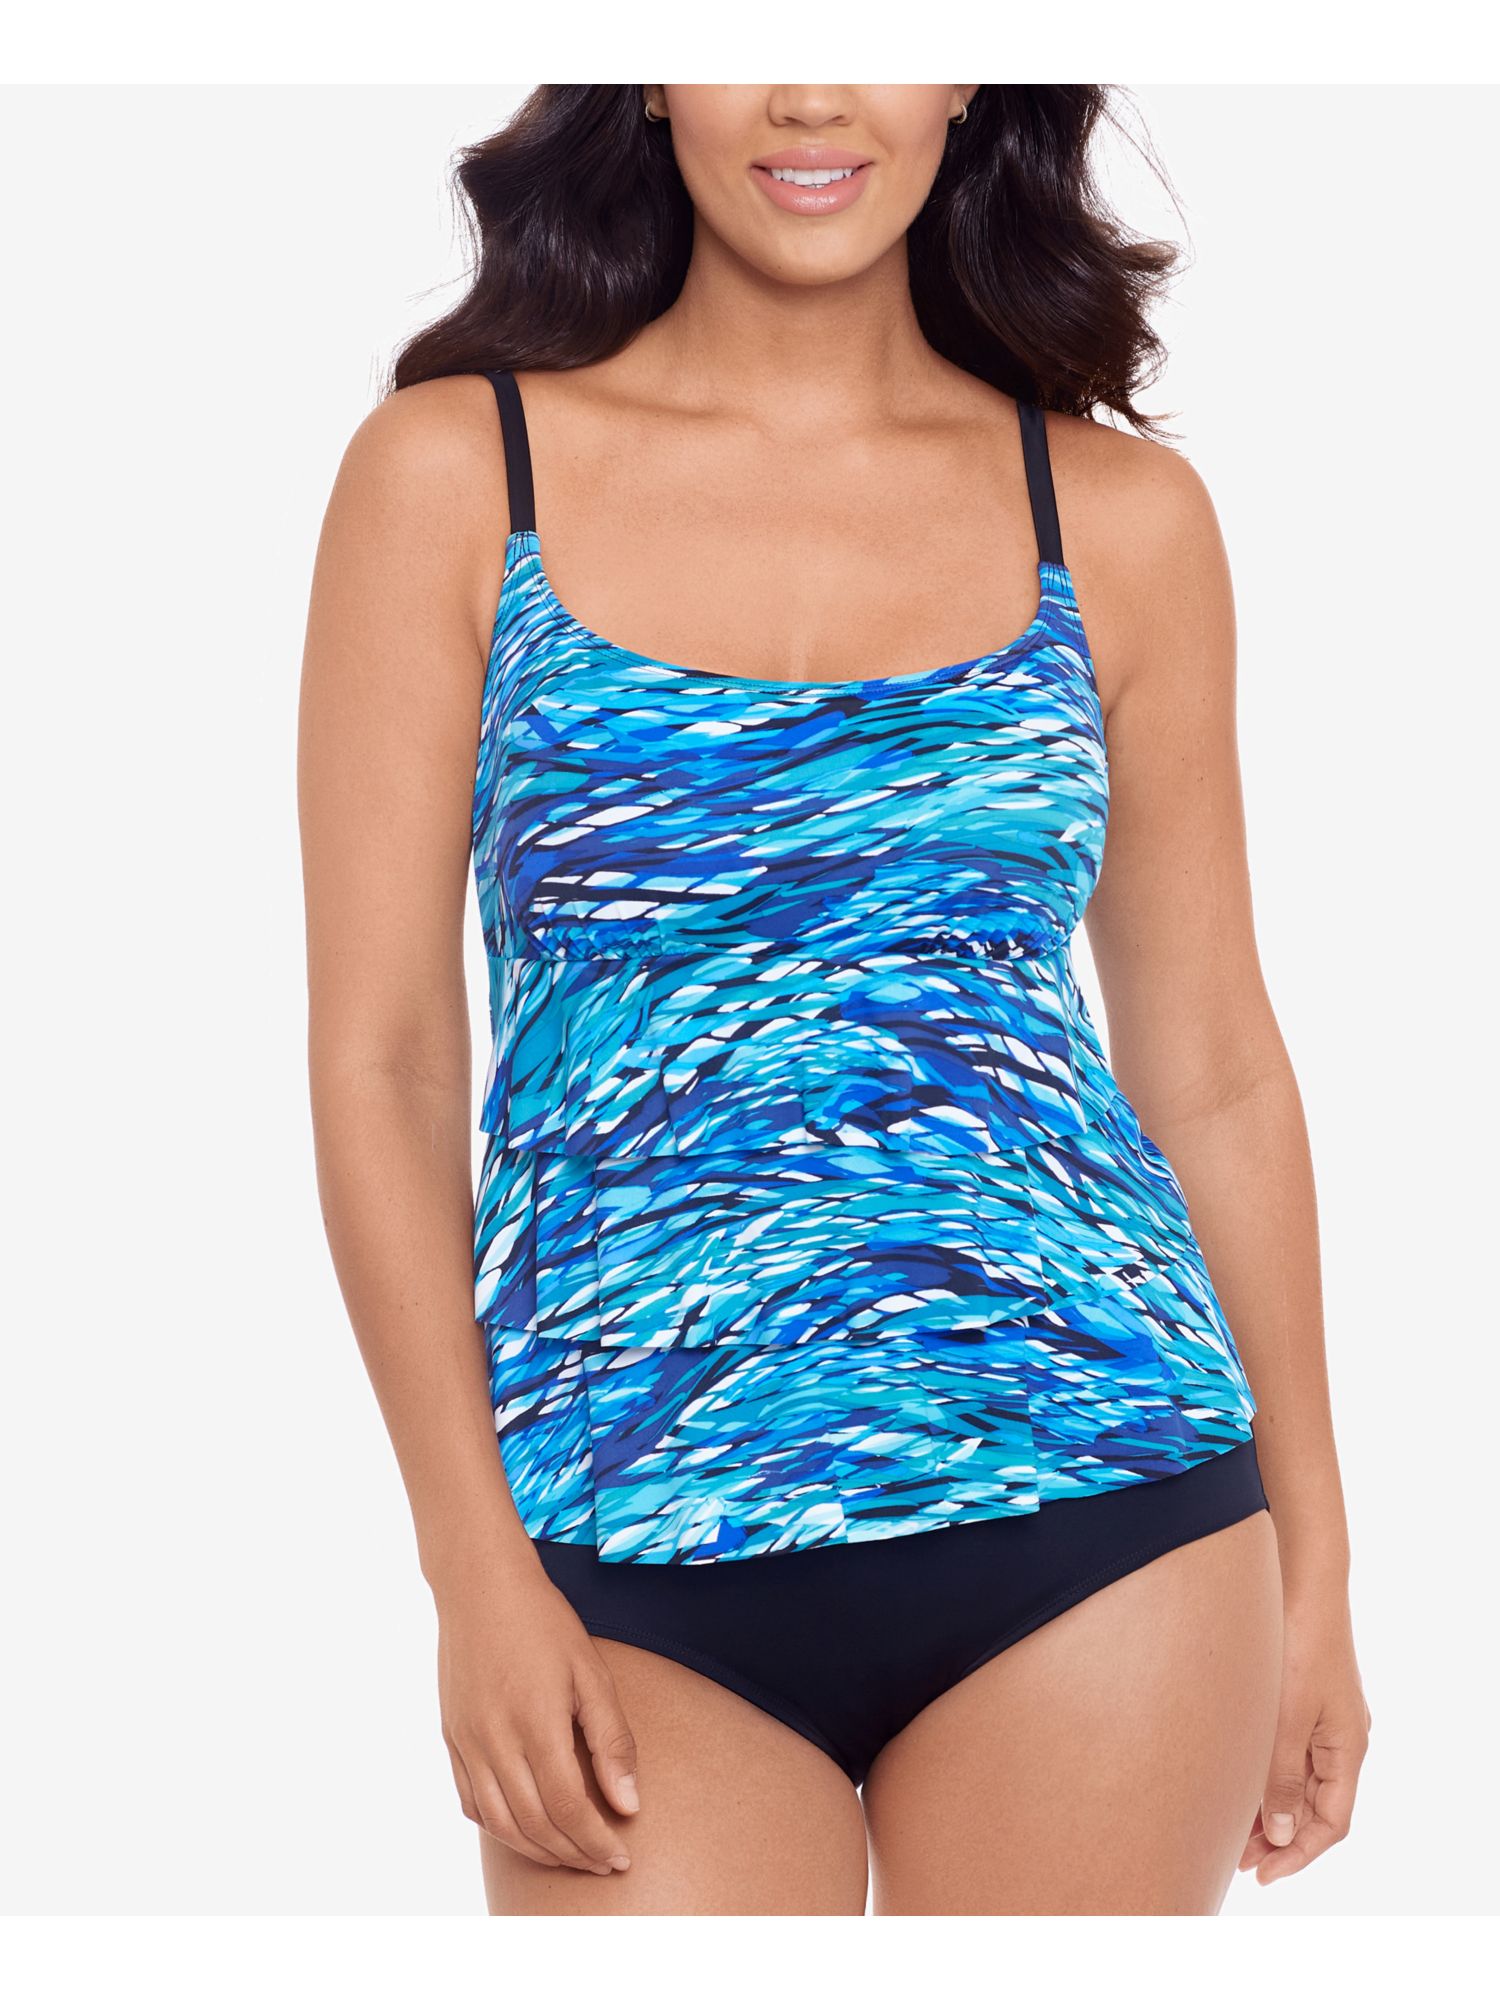 SWIM SOLUTIONS Women's Blue Patterned Stretch Tummy Control Lined Tiered Adjustable Fixed Cups Scoop Neck One Piece Swimsuit 14